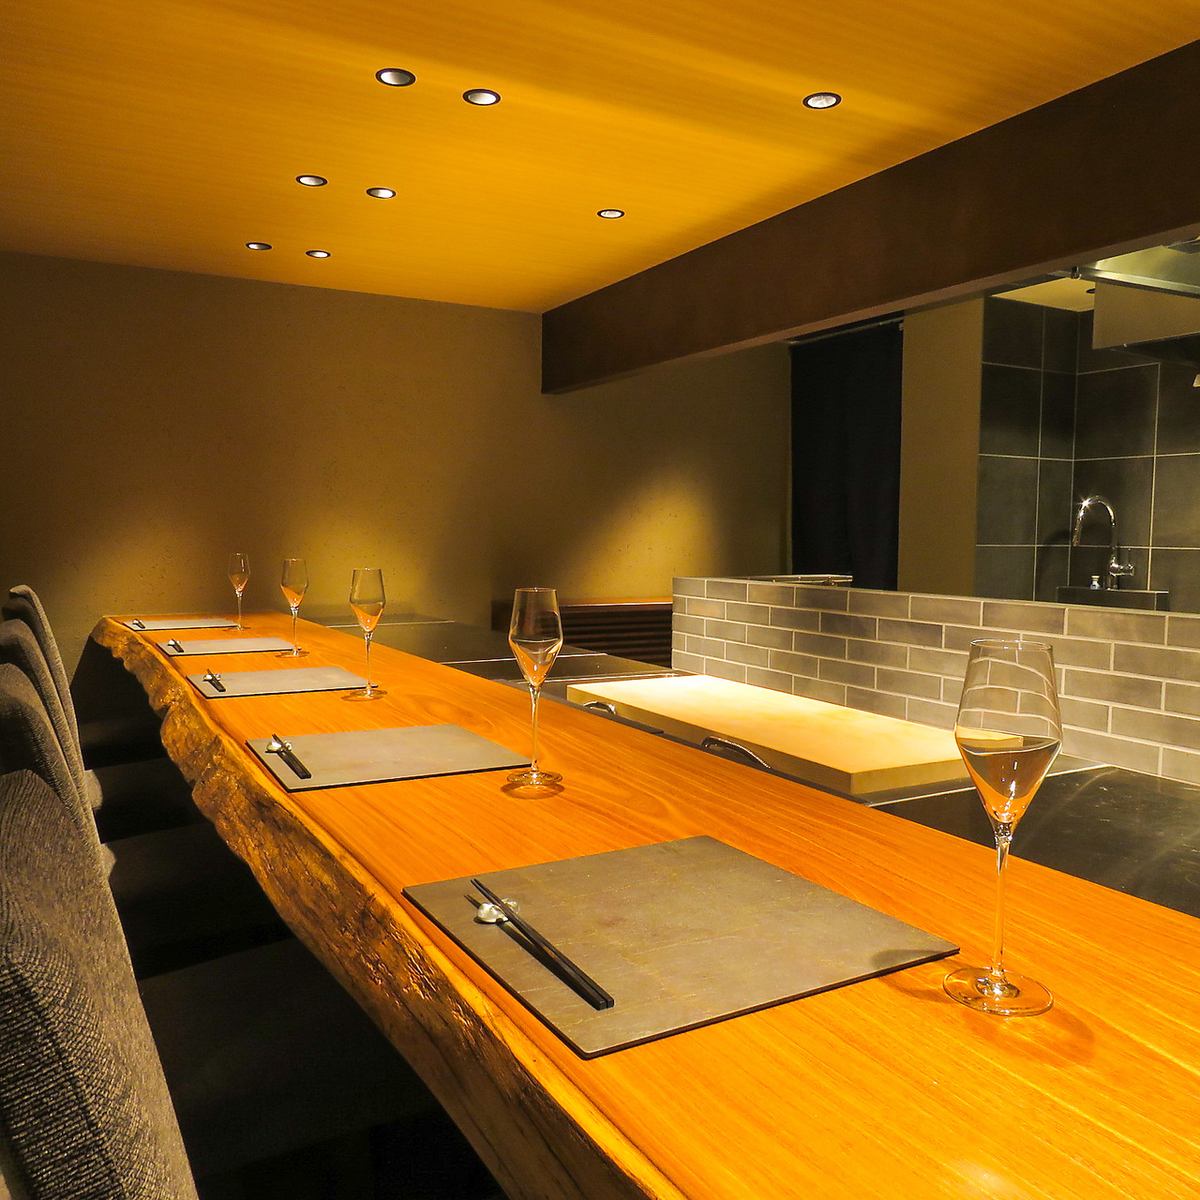 A 7-minute walk from Machida Station A sophisticated space opens when you open the hideaway door.